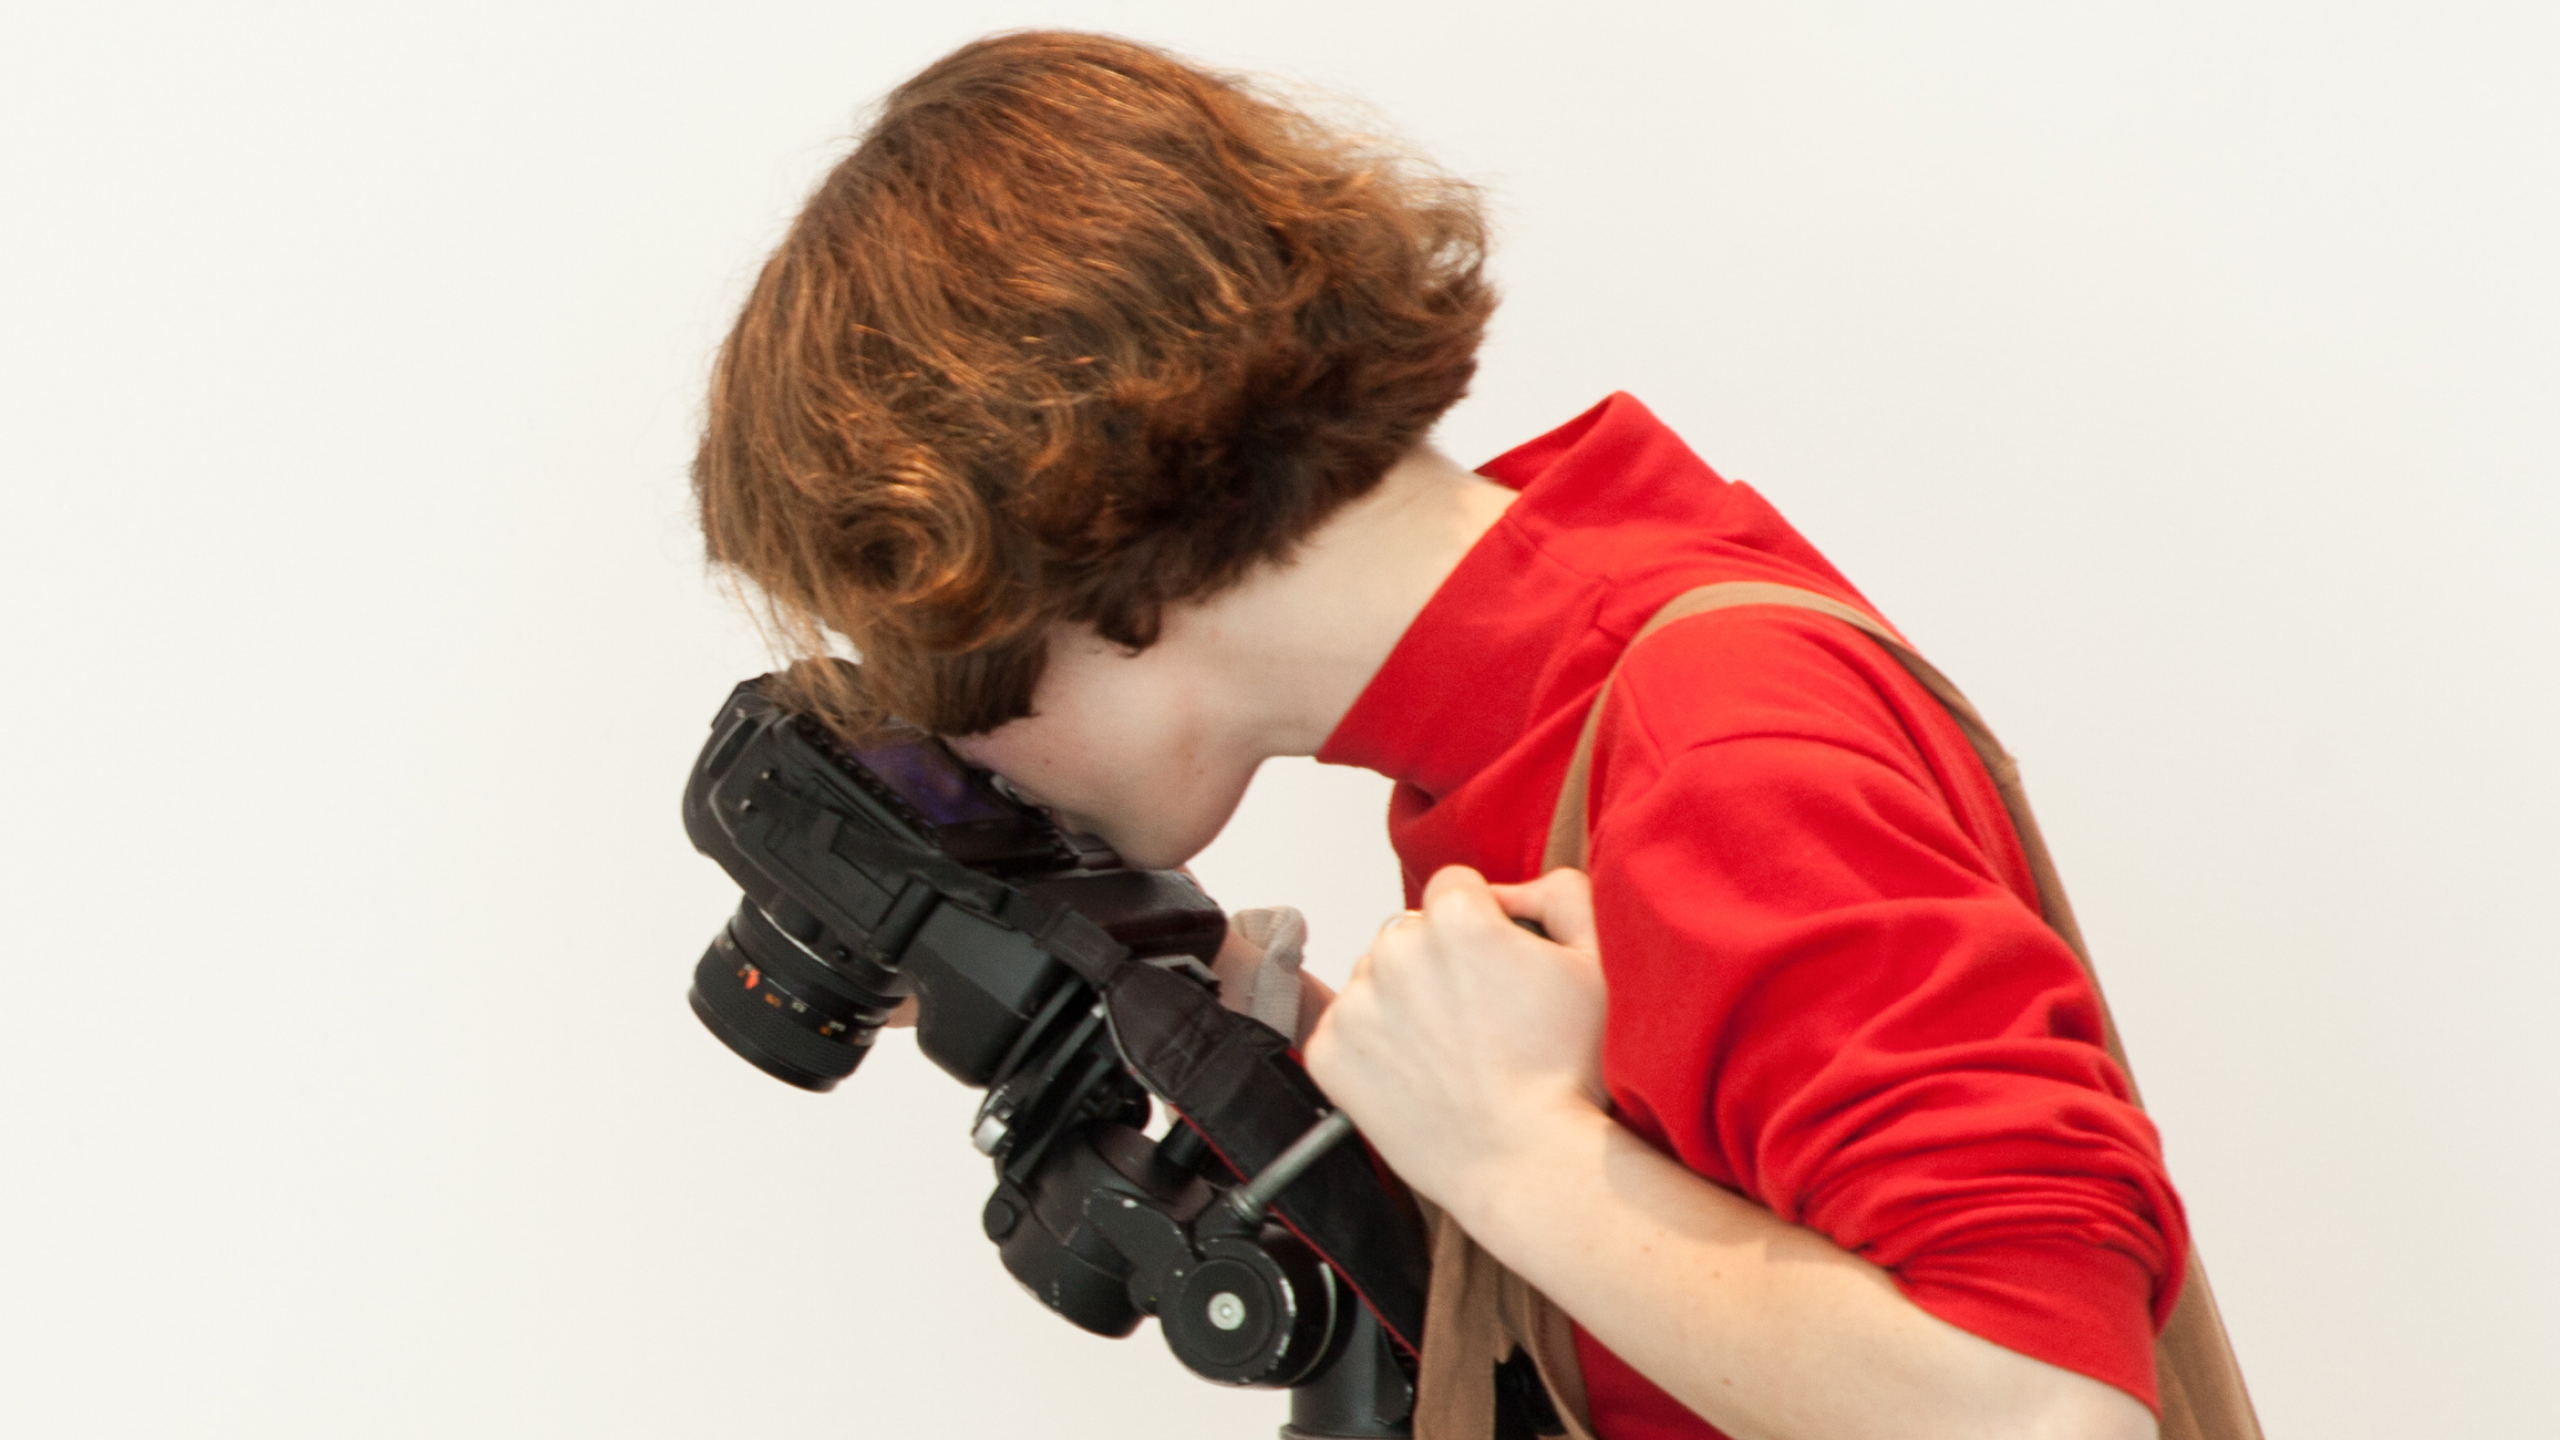 A student looks through a camera, angled down at something out of frame.